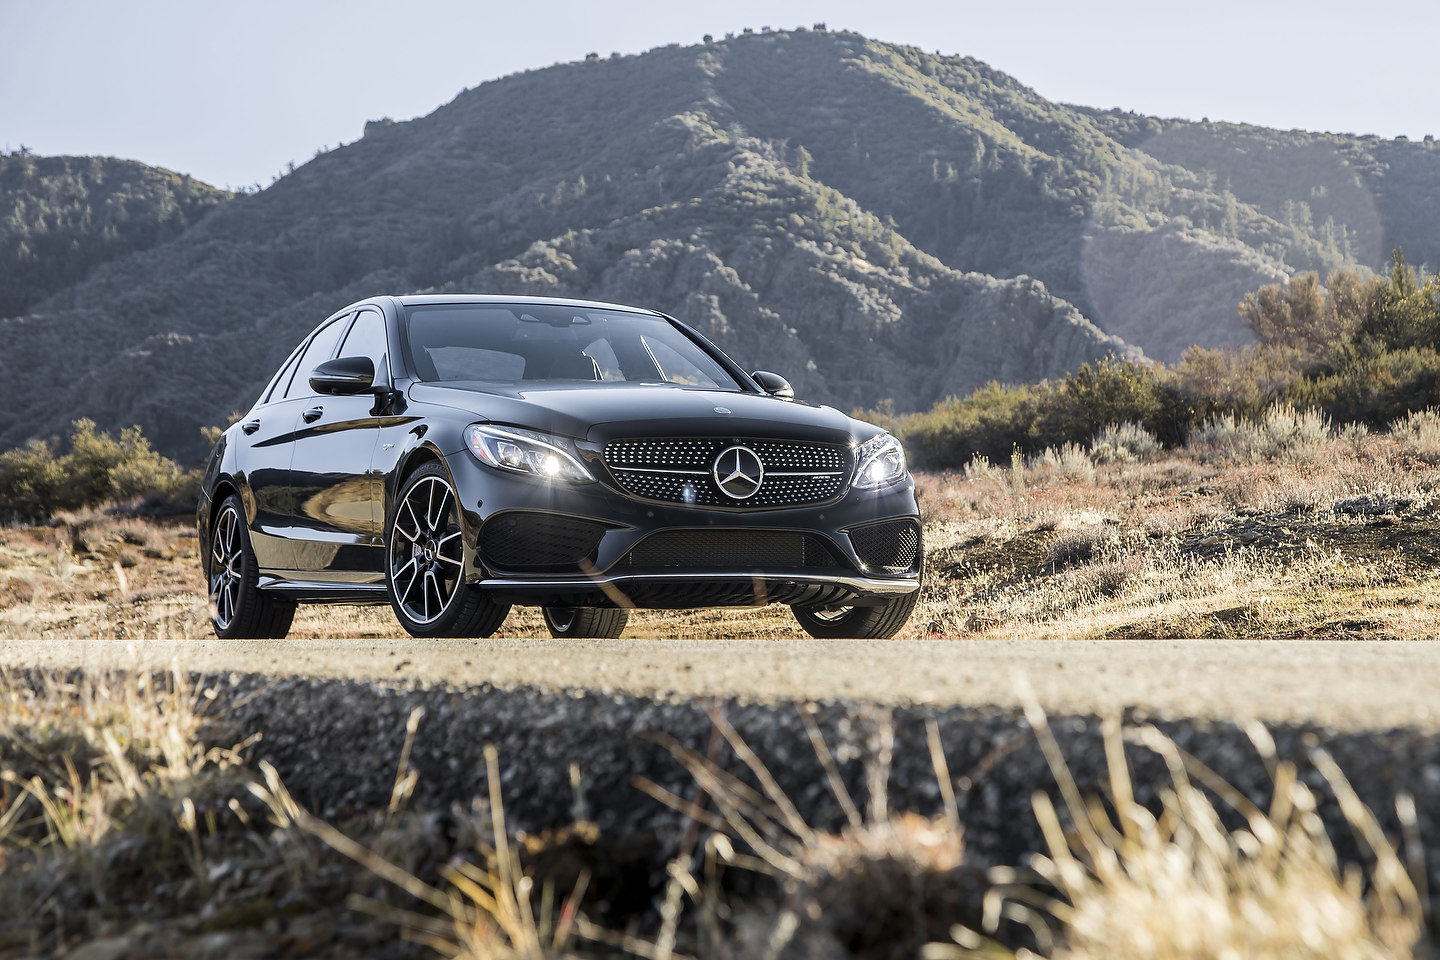 Mercedes-Benz vehicles offer the best resale value according to the 2021 Canadian Black Book